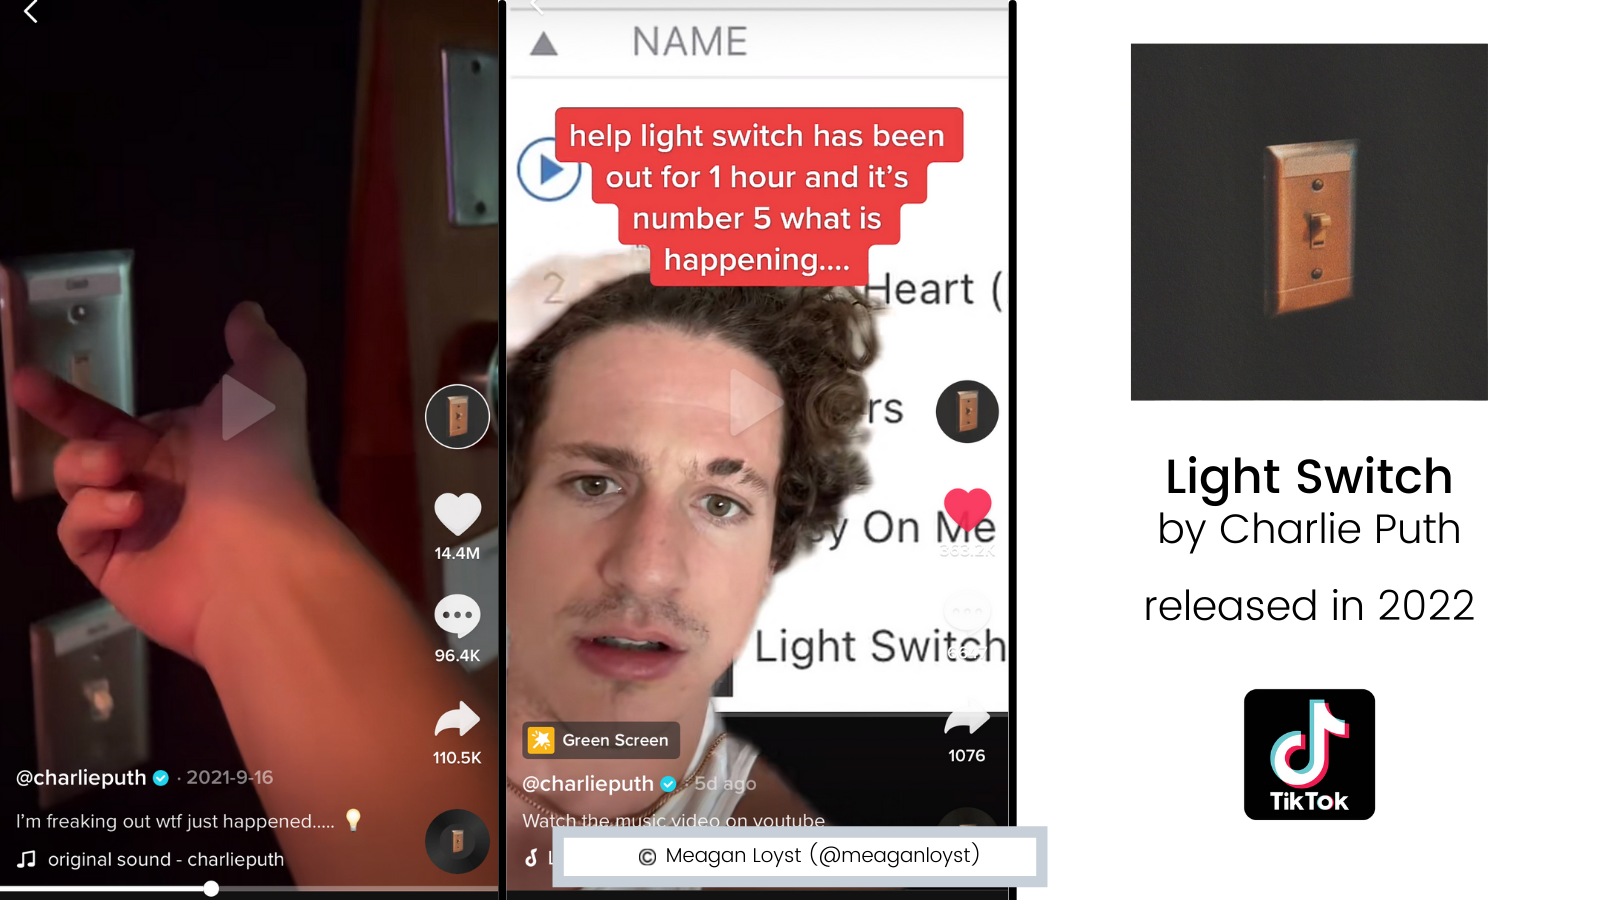 Charlie Puth's new hit single, "Light Switch" which had been previewed on TikTok over the past few months before its release